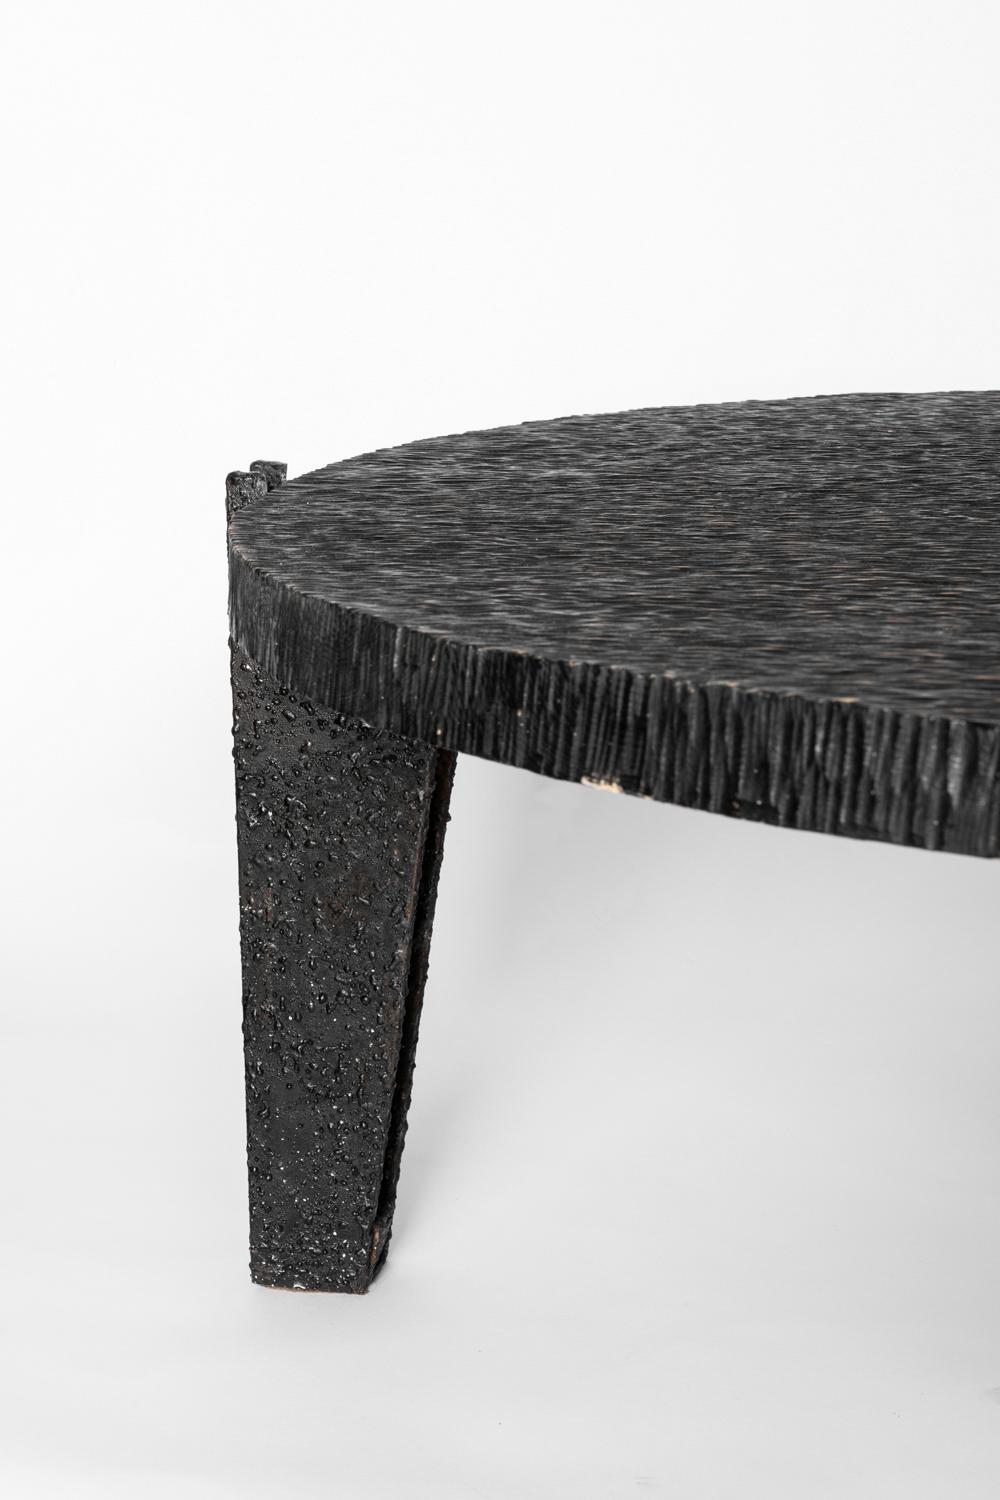 French Blackened Gouged Wood Coffee Table, Contemporary Work